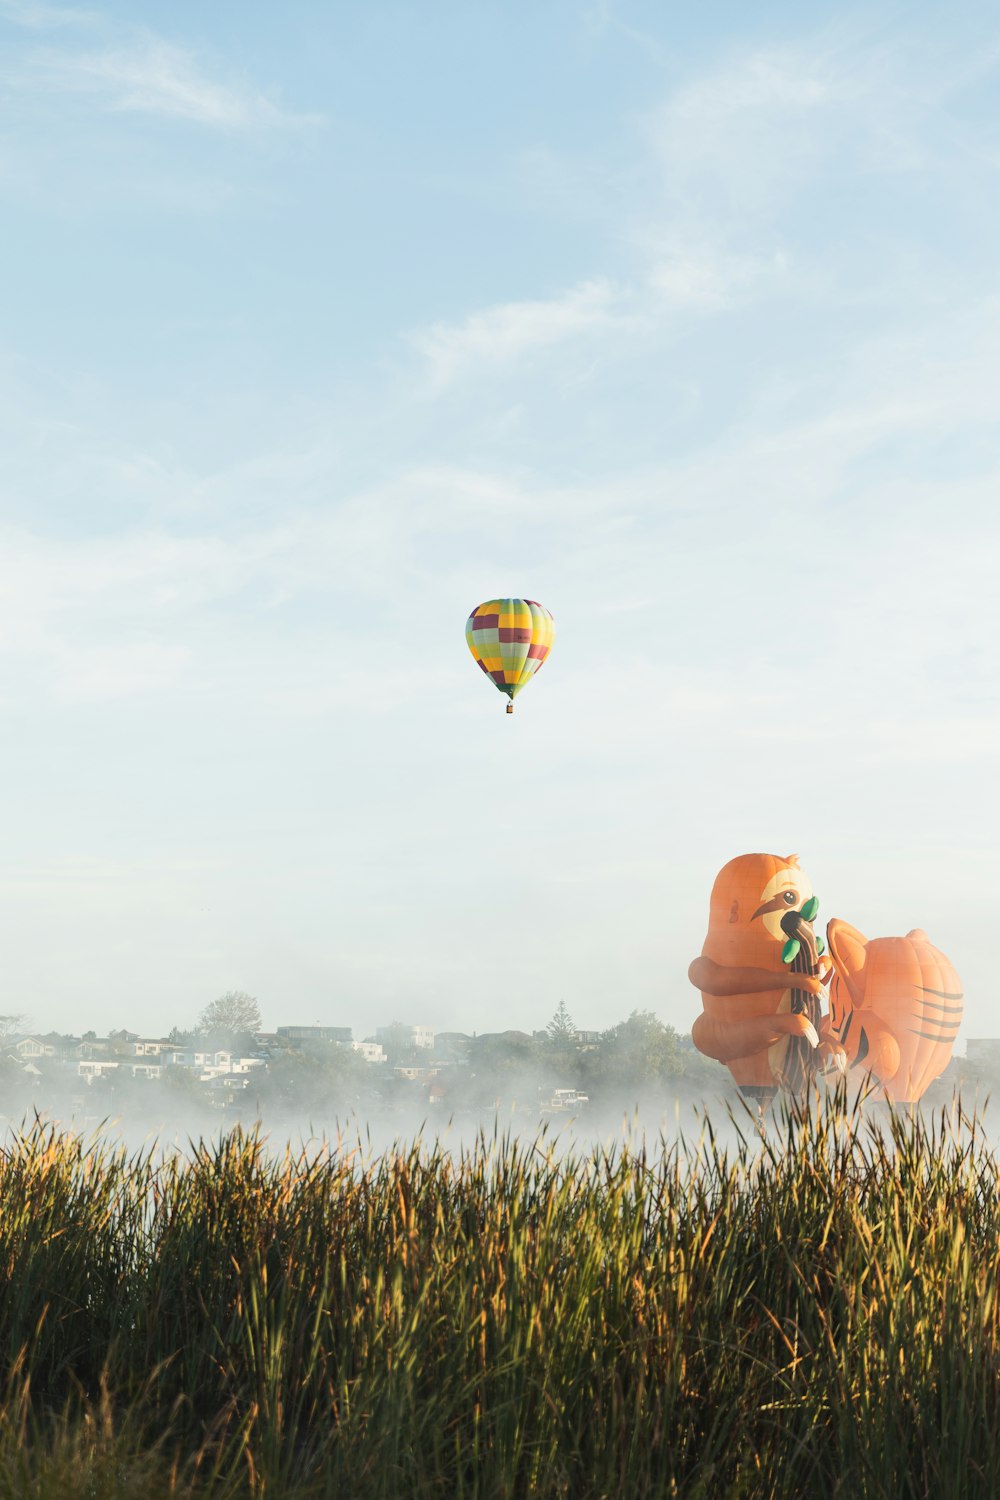 a couple of hot air balloons flying over a lush green field